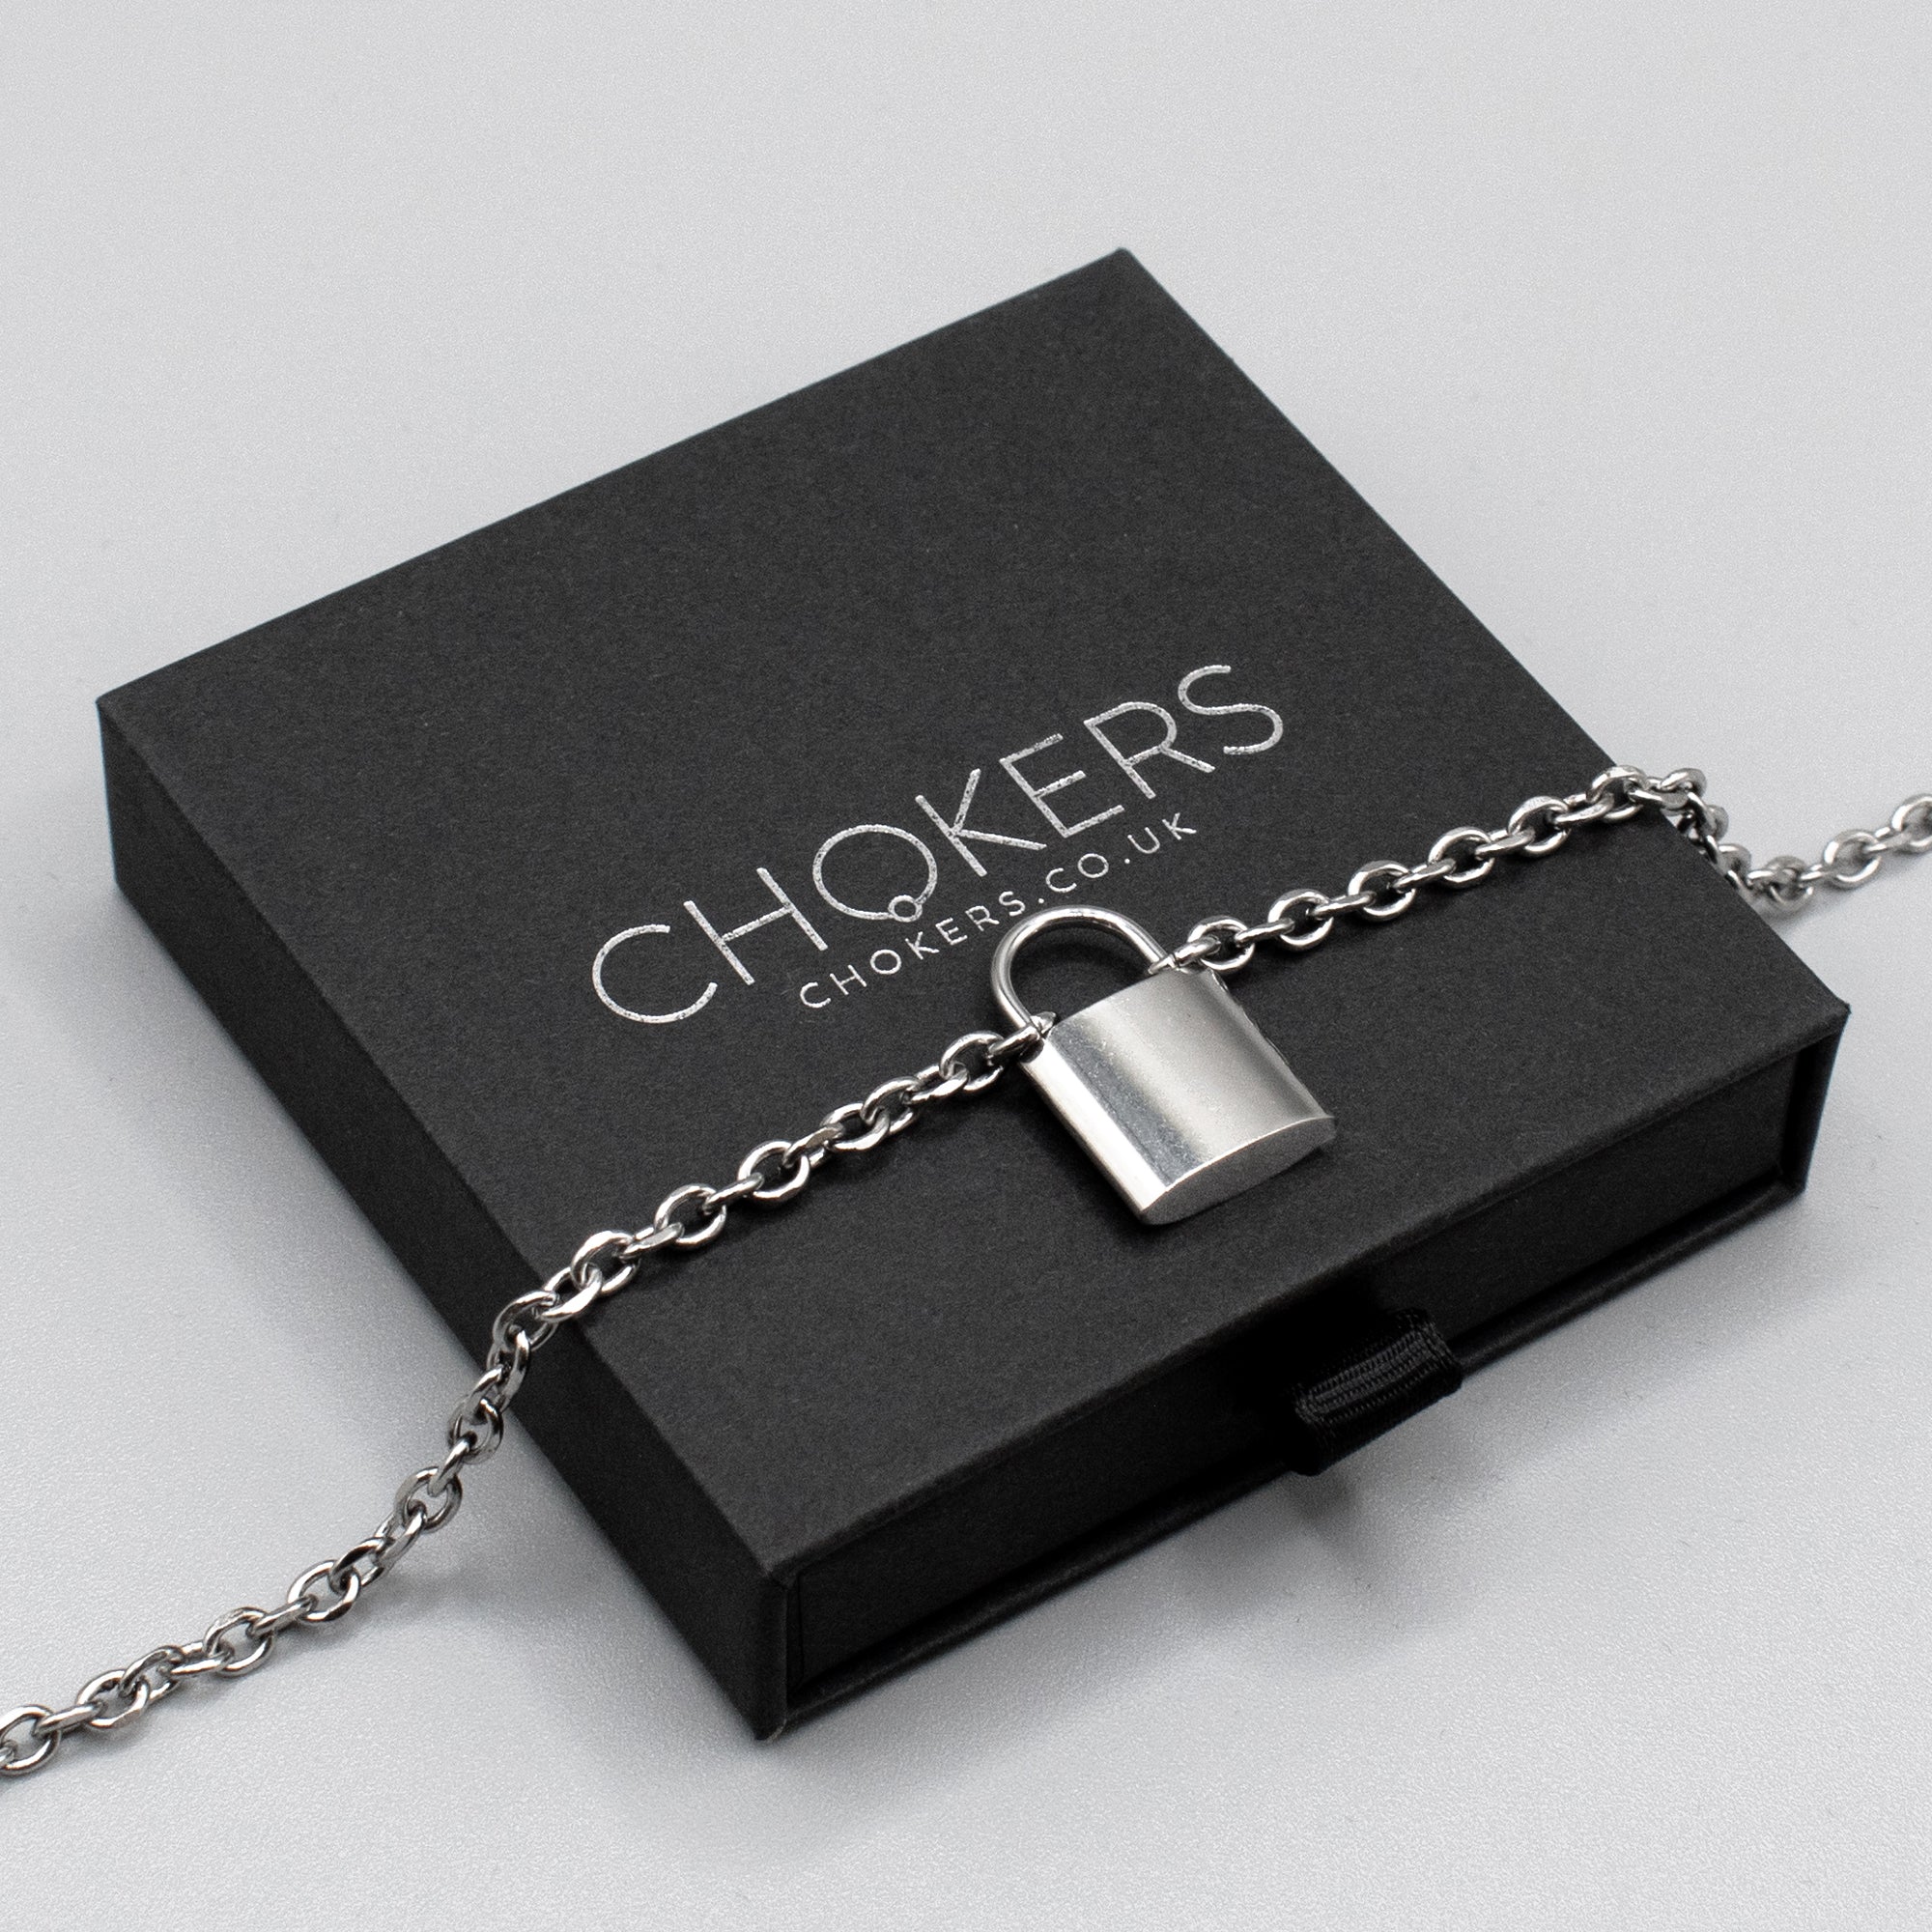 A day collar made up from a 25mm stainless steel padlock Pendant on 4mm stainless steel cable chain